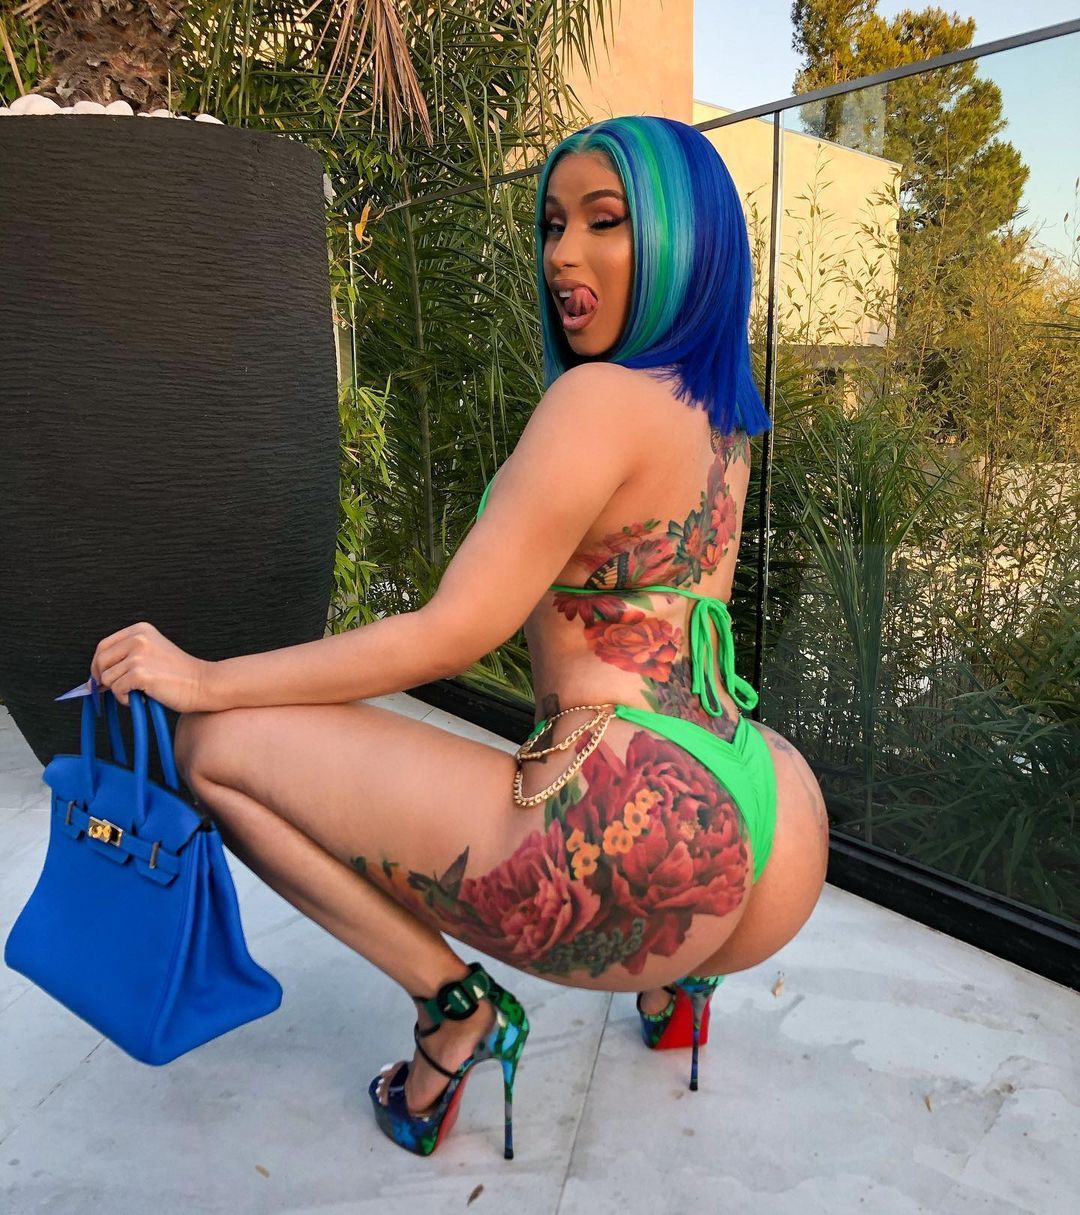 Cardi B's Tattoos, Photos and Meanings - All of Cardi's Tats